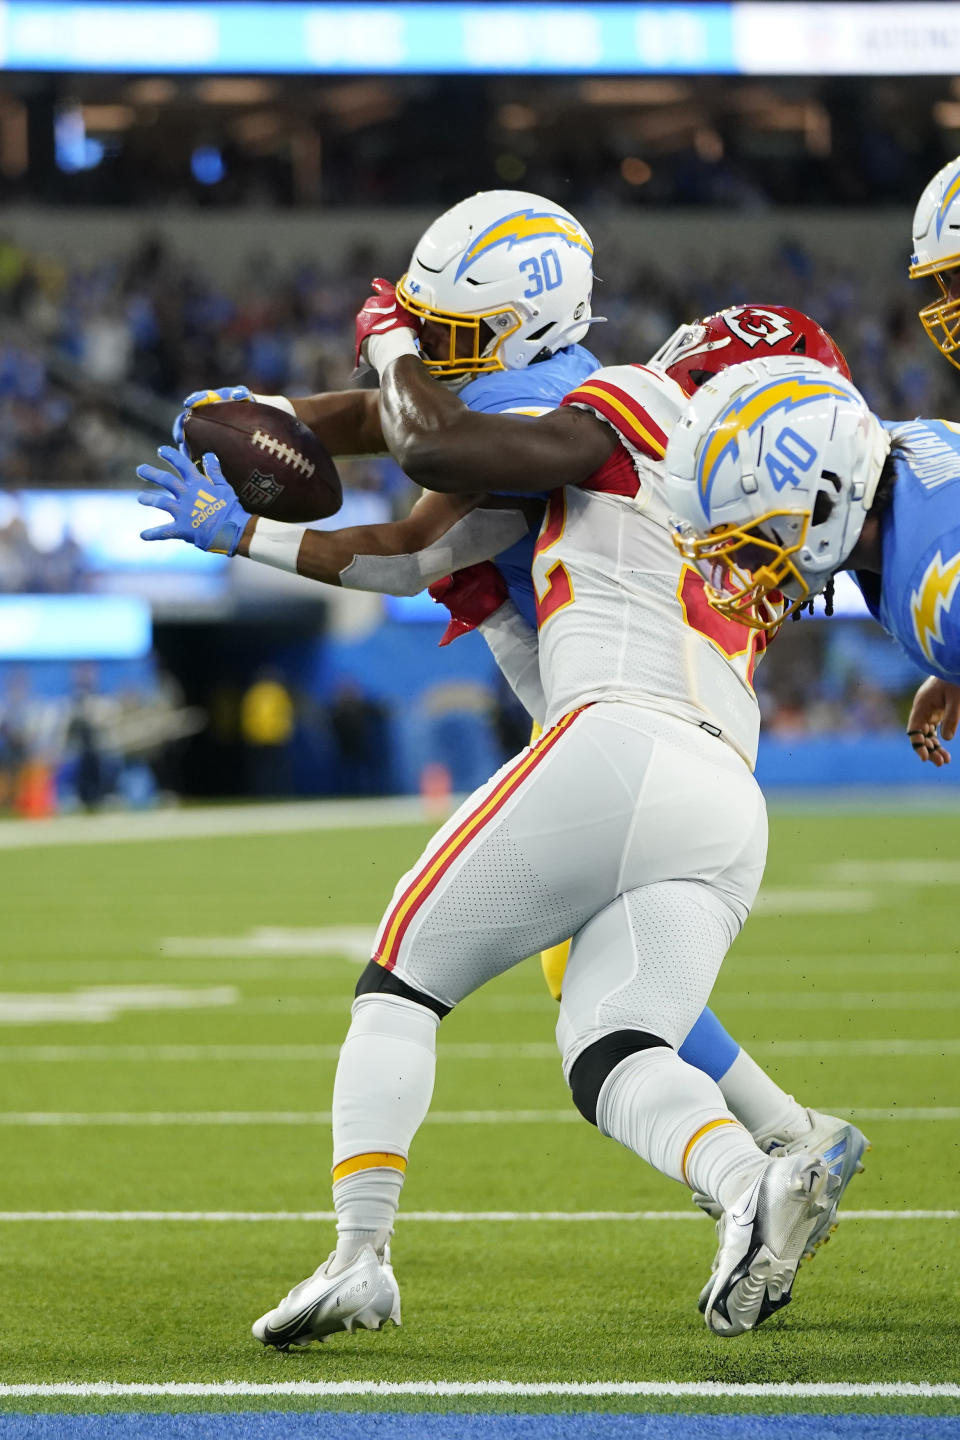 Los Angeles Chargers running back Austin Ekeler, left, scores a touchdown as he is face masked by Kansas City Chiefs linebacker Nick Bolton during the first half of an NFL football game Sunday, Nov. 20, 2022, in Inglewood, Calif. (AP Photo/Jae C. Hong)